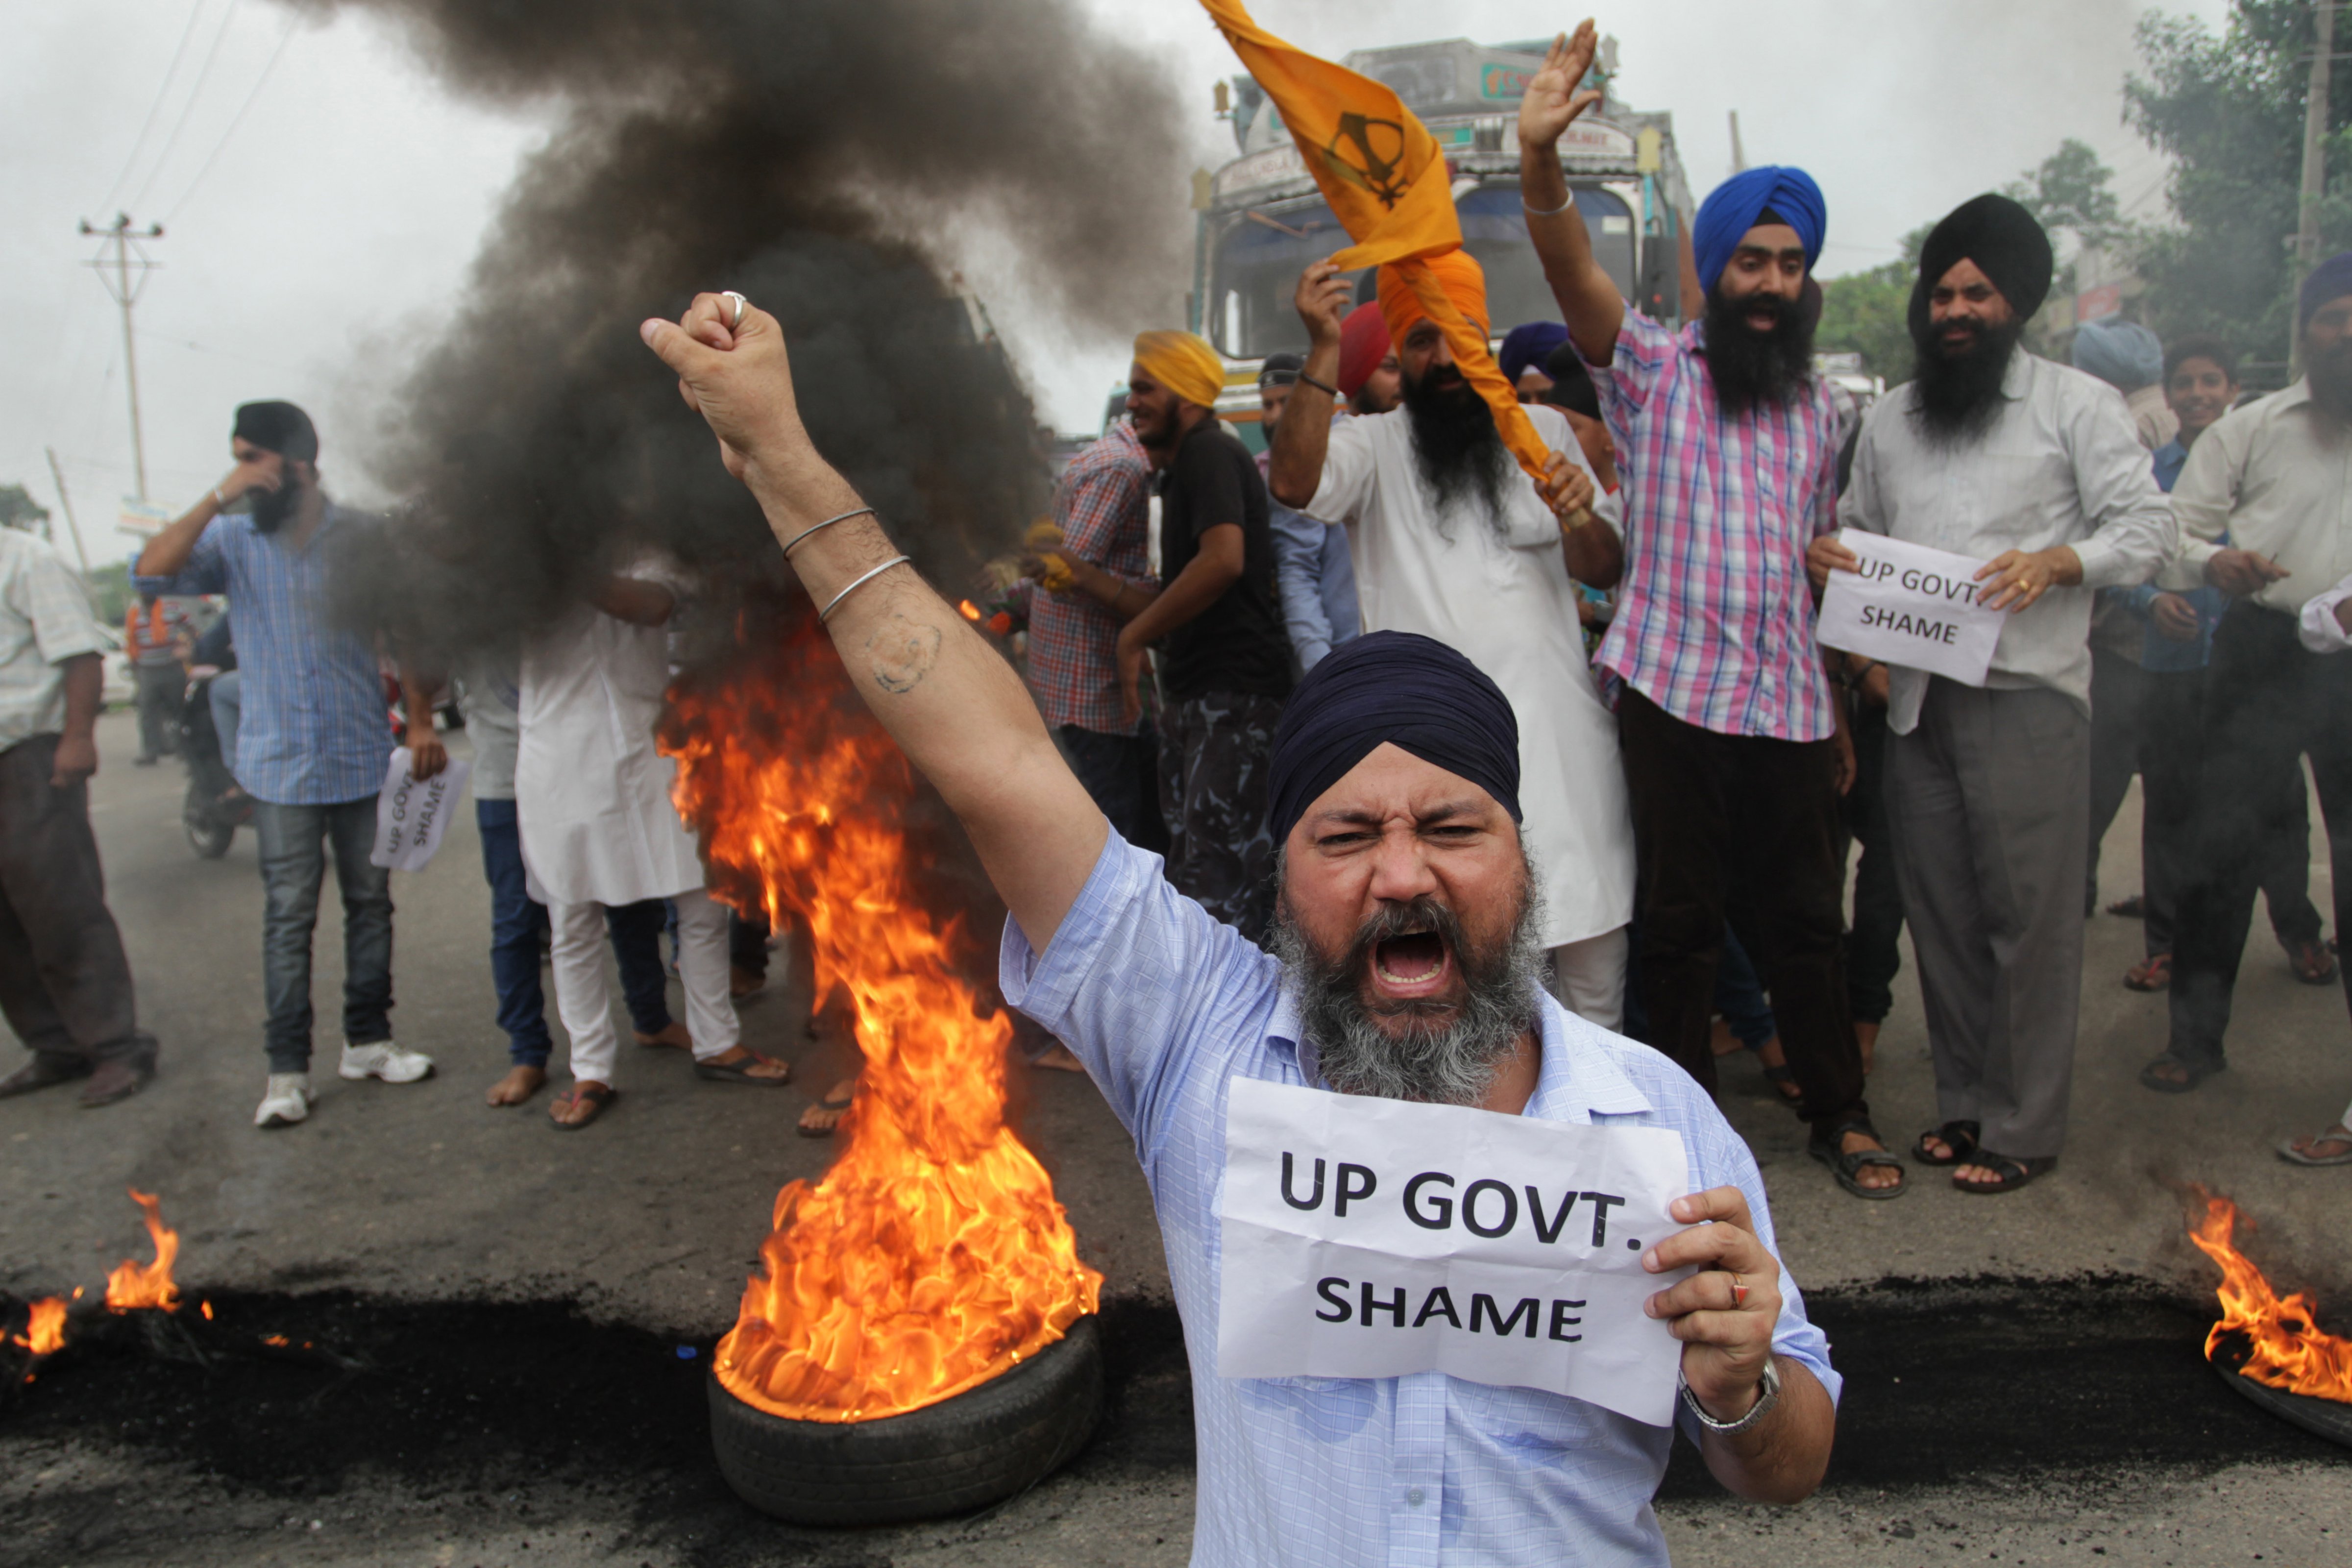 Members of the Sikh community shout slogans as they burn tires during a protest in the Indian state of Uttar Pradesh on July 27, 2014. (Jaipal Singh—EPA)